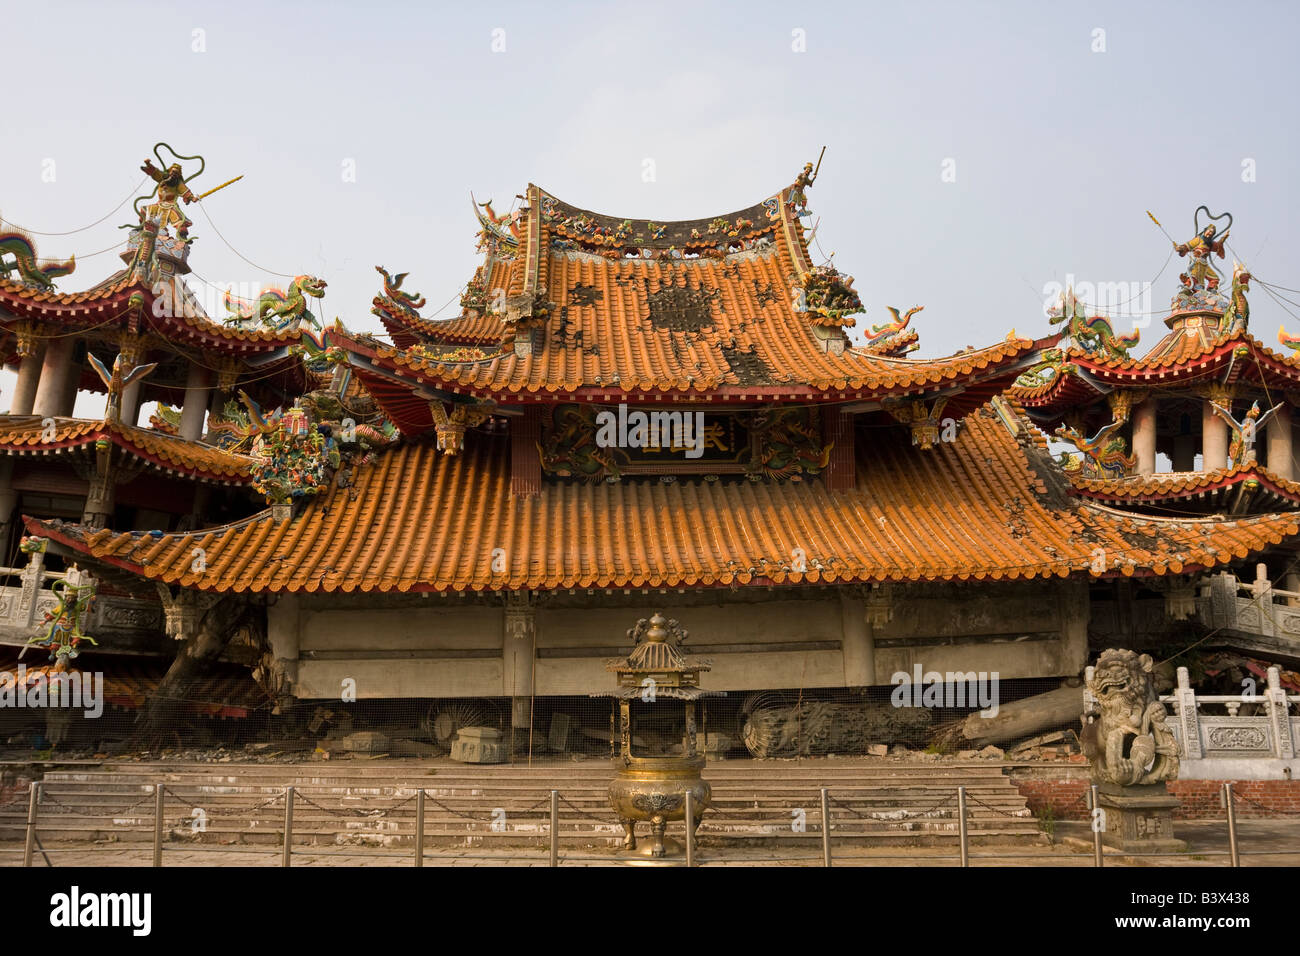 Wuchang Temple, Jiji, Taiwan. The temple collapsed during a 7.3 magnitude earthquake in 1999. It is now a tourist attraction. Stock Photo